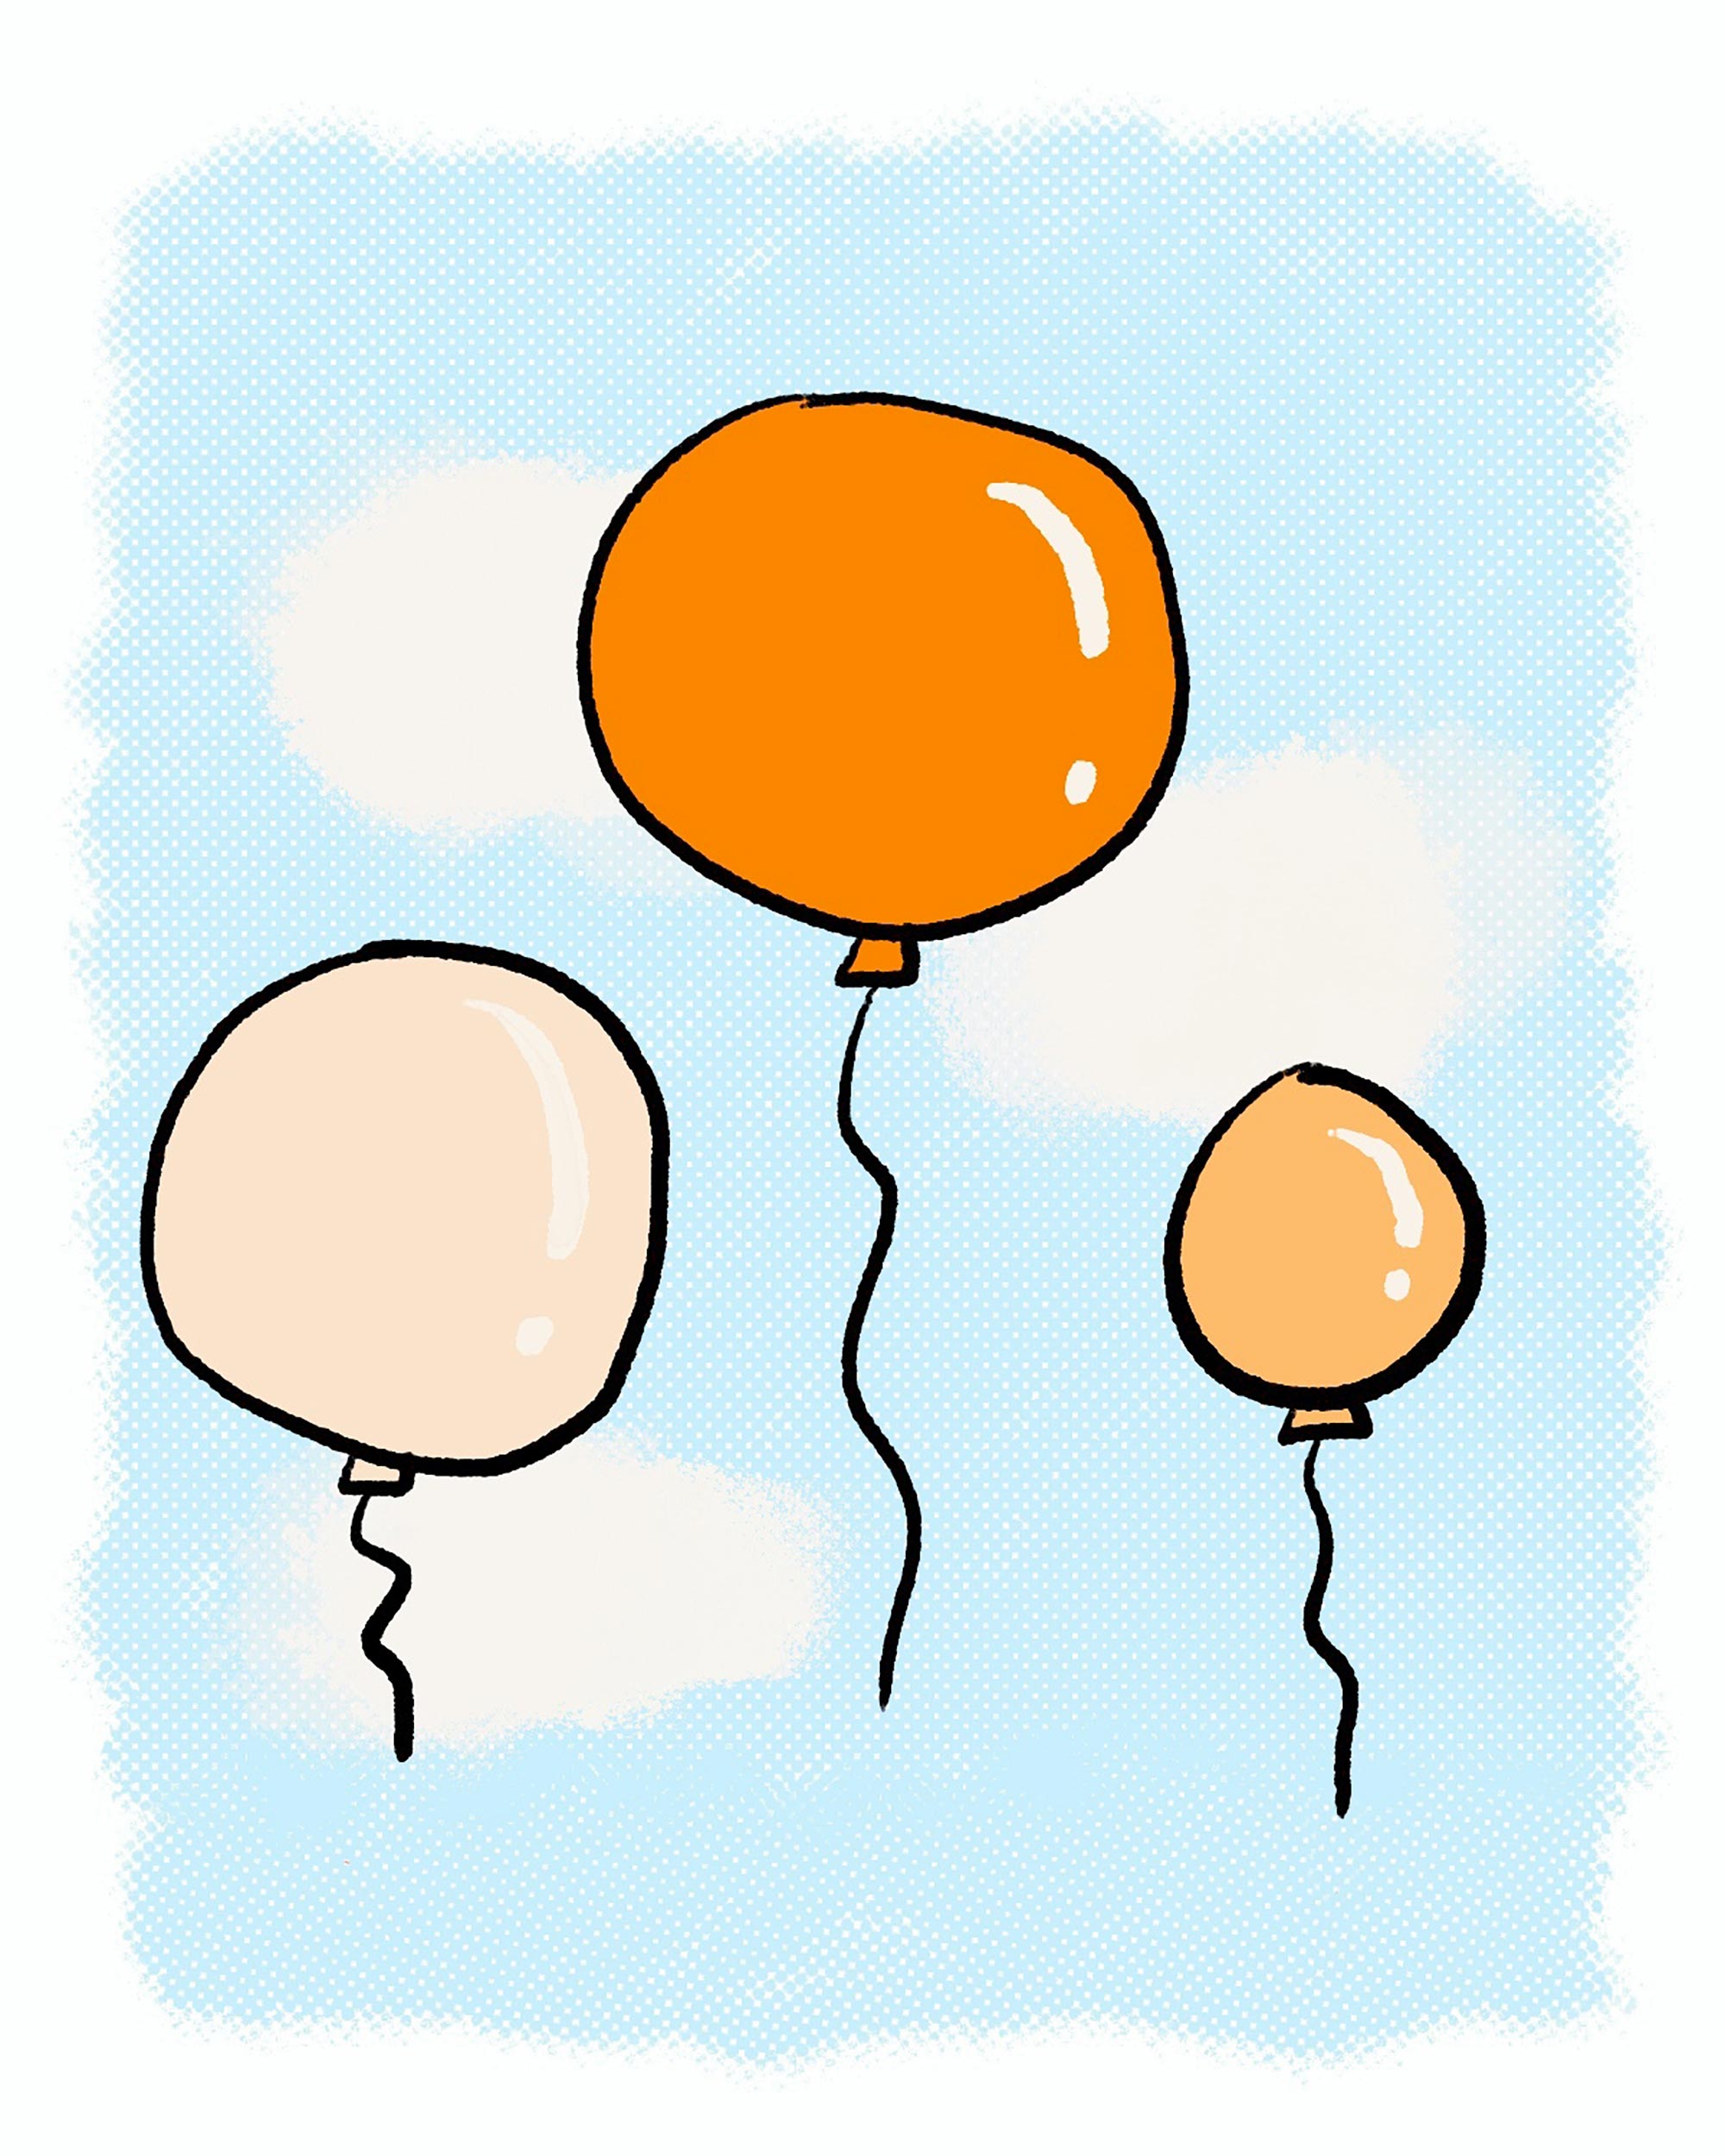 Illustration of balloons being released into the air